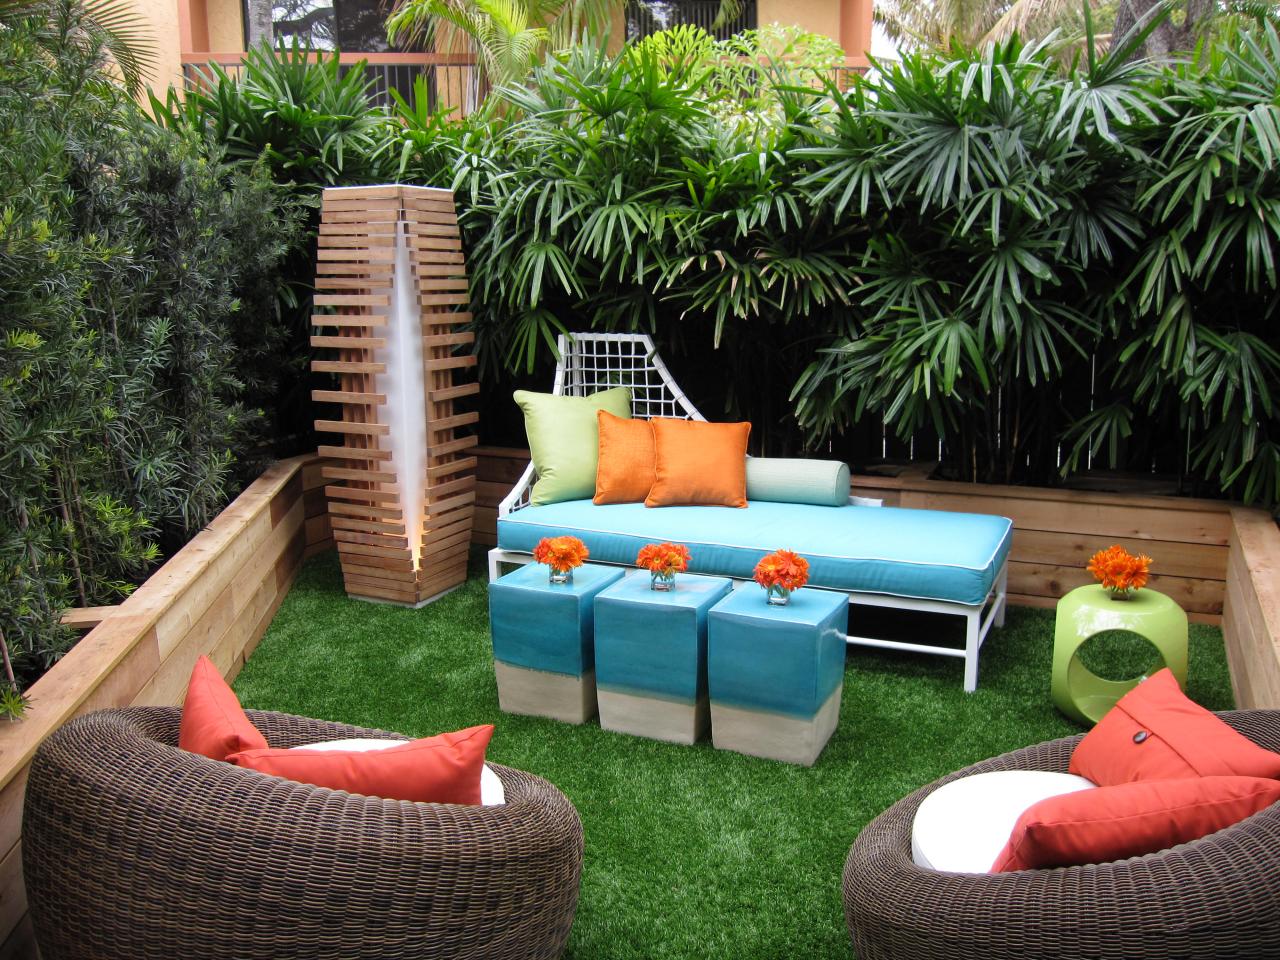 12 Clever Ways to Create More Privacy in Your Backyard